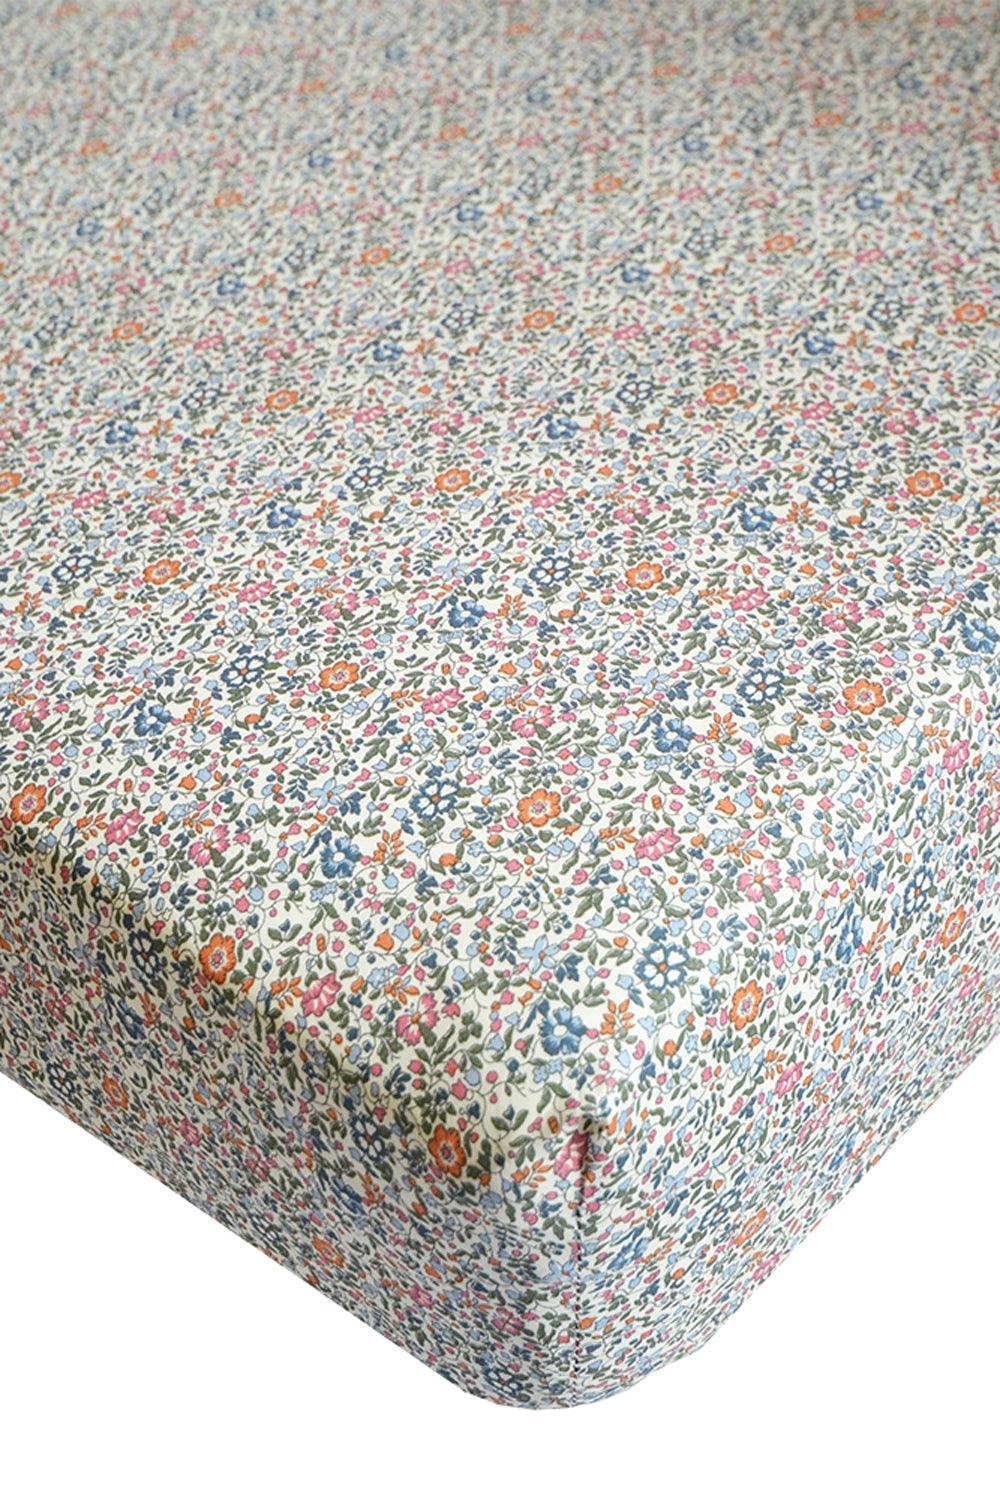 Fitted Sheet made with Liberty Fabric KATIE & MILLIE RUST - Coco & Wolf